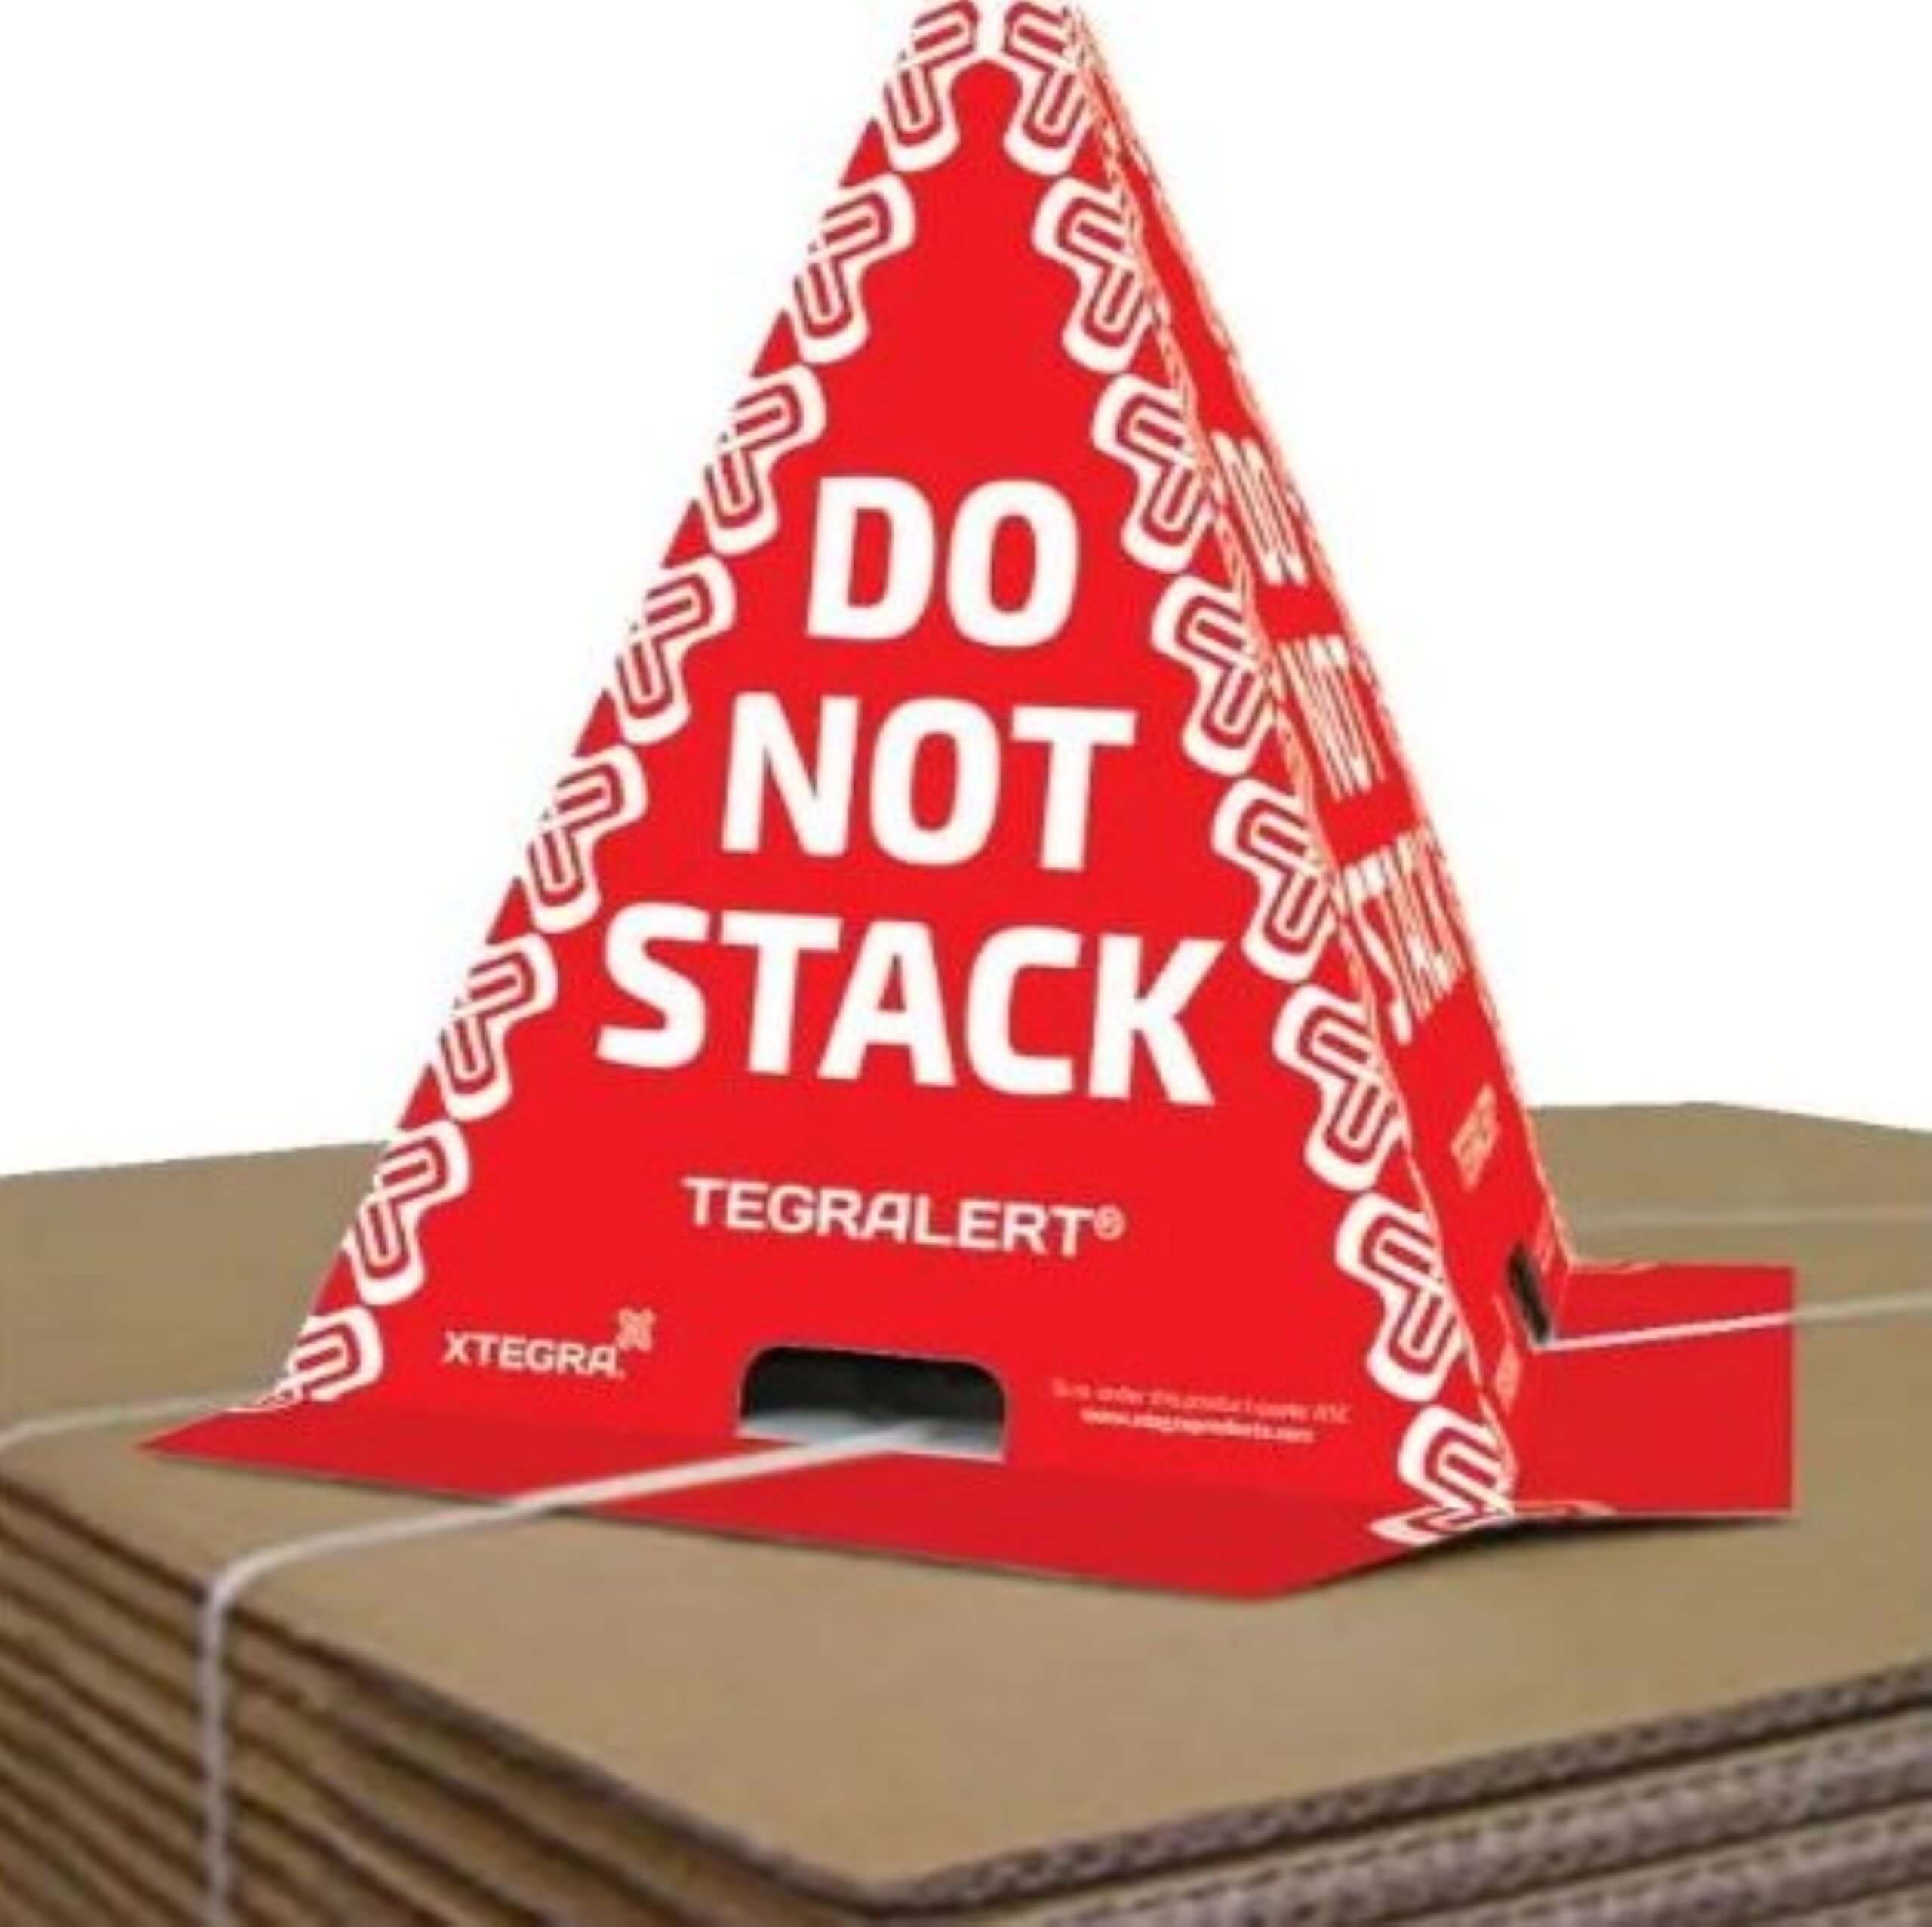 An image of one of our "Do Not Stack" Cardboard Cones.